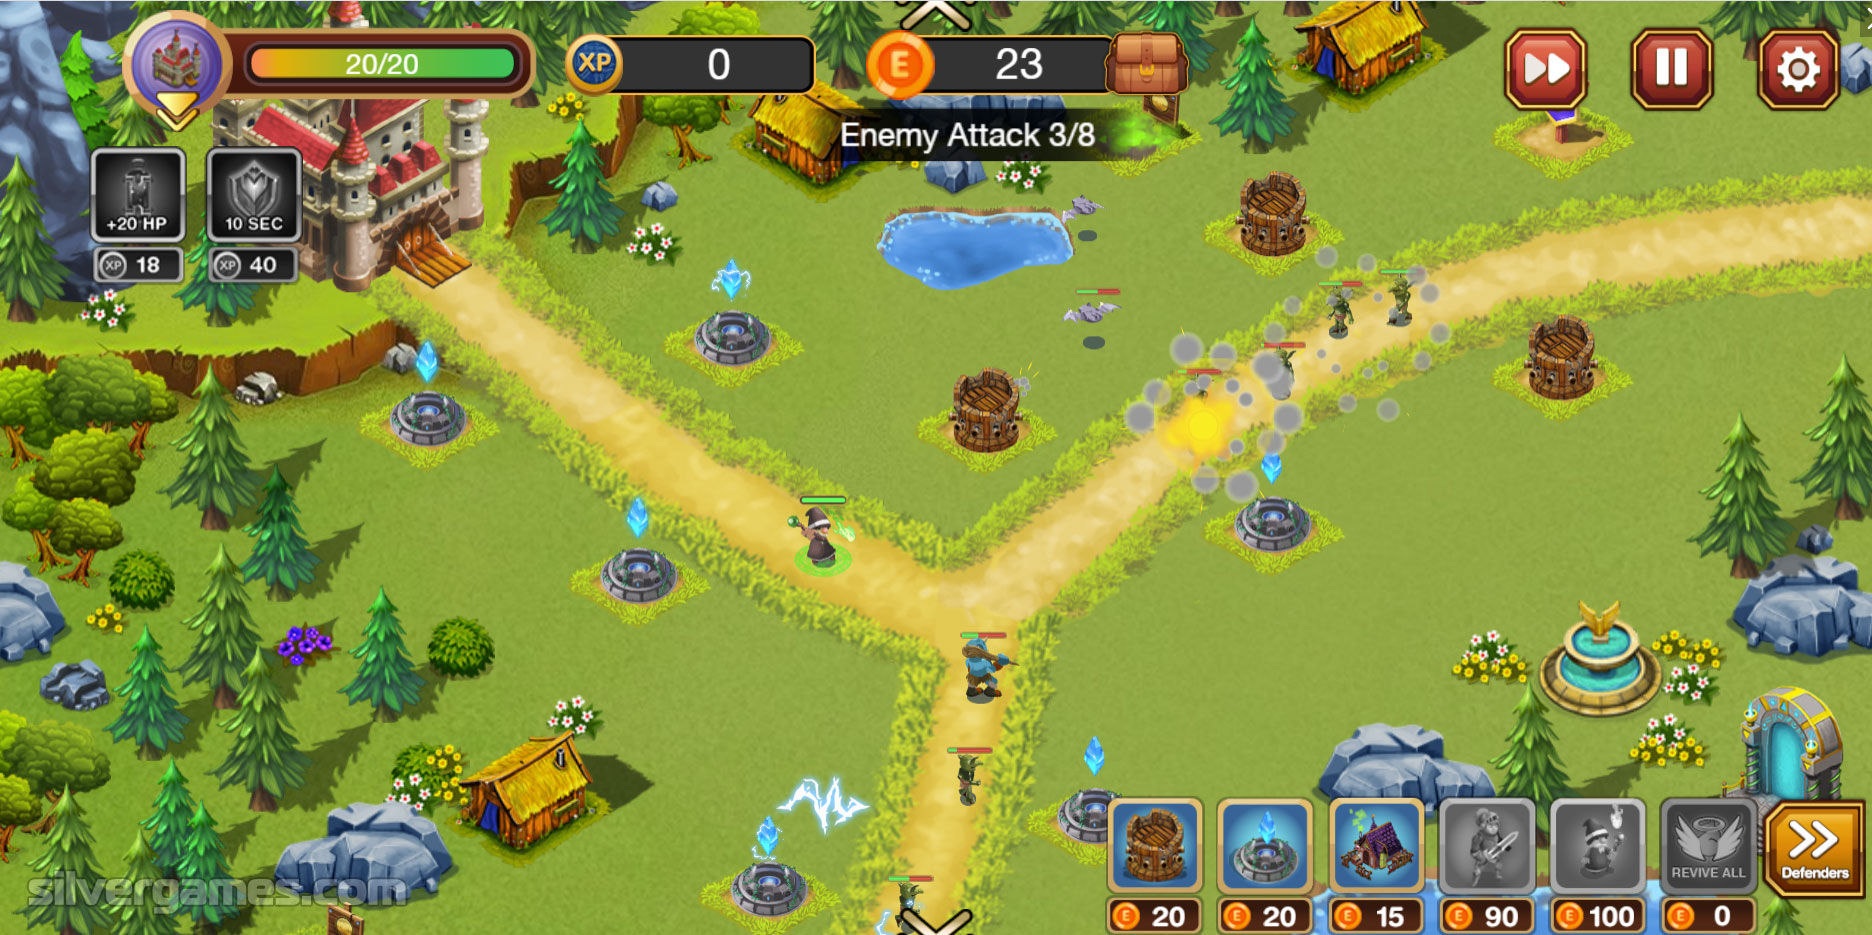 Bloons Tower Defense 2 - Play Online on SilverGames 🕹️